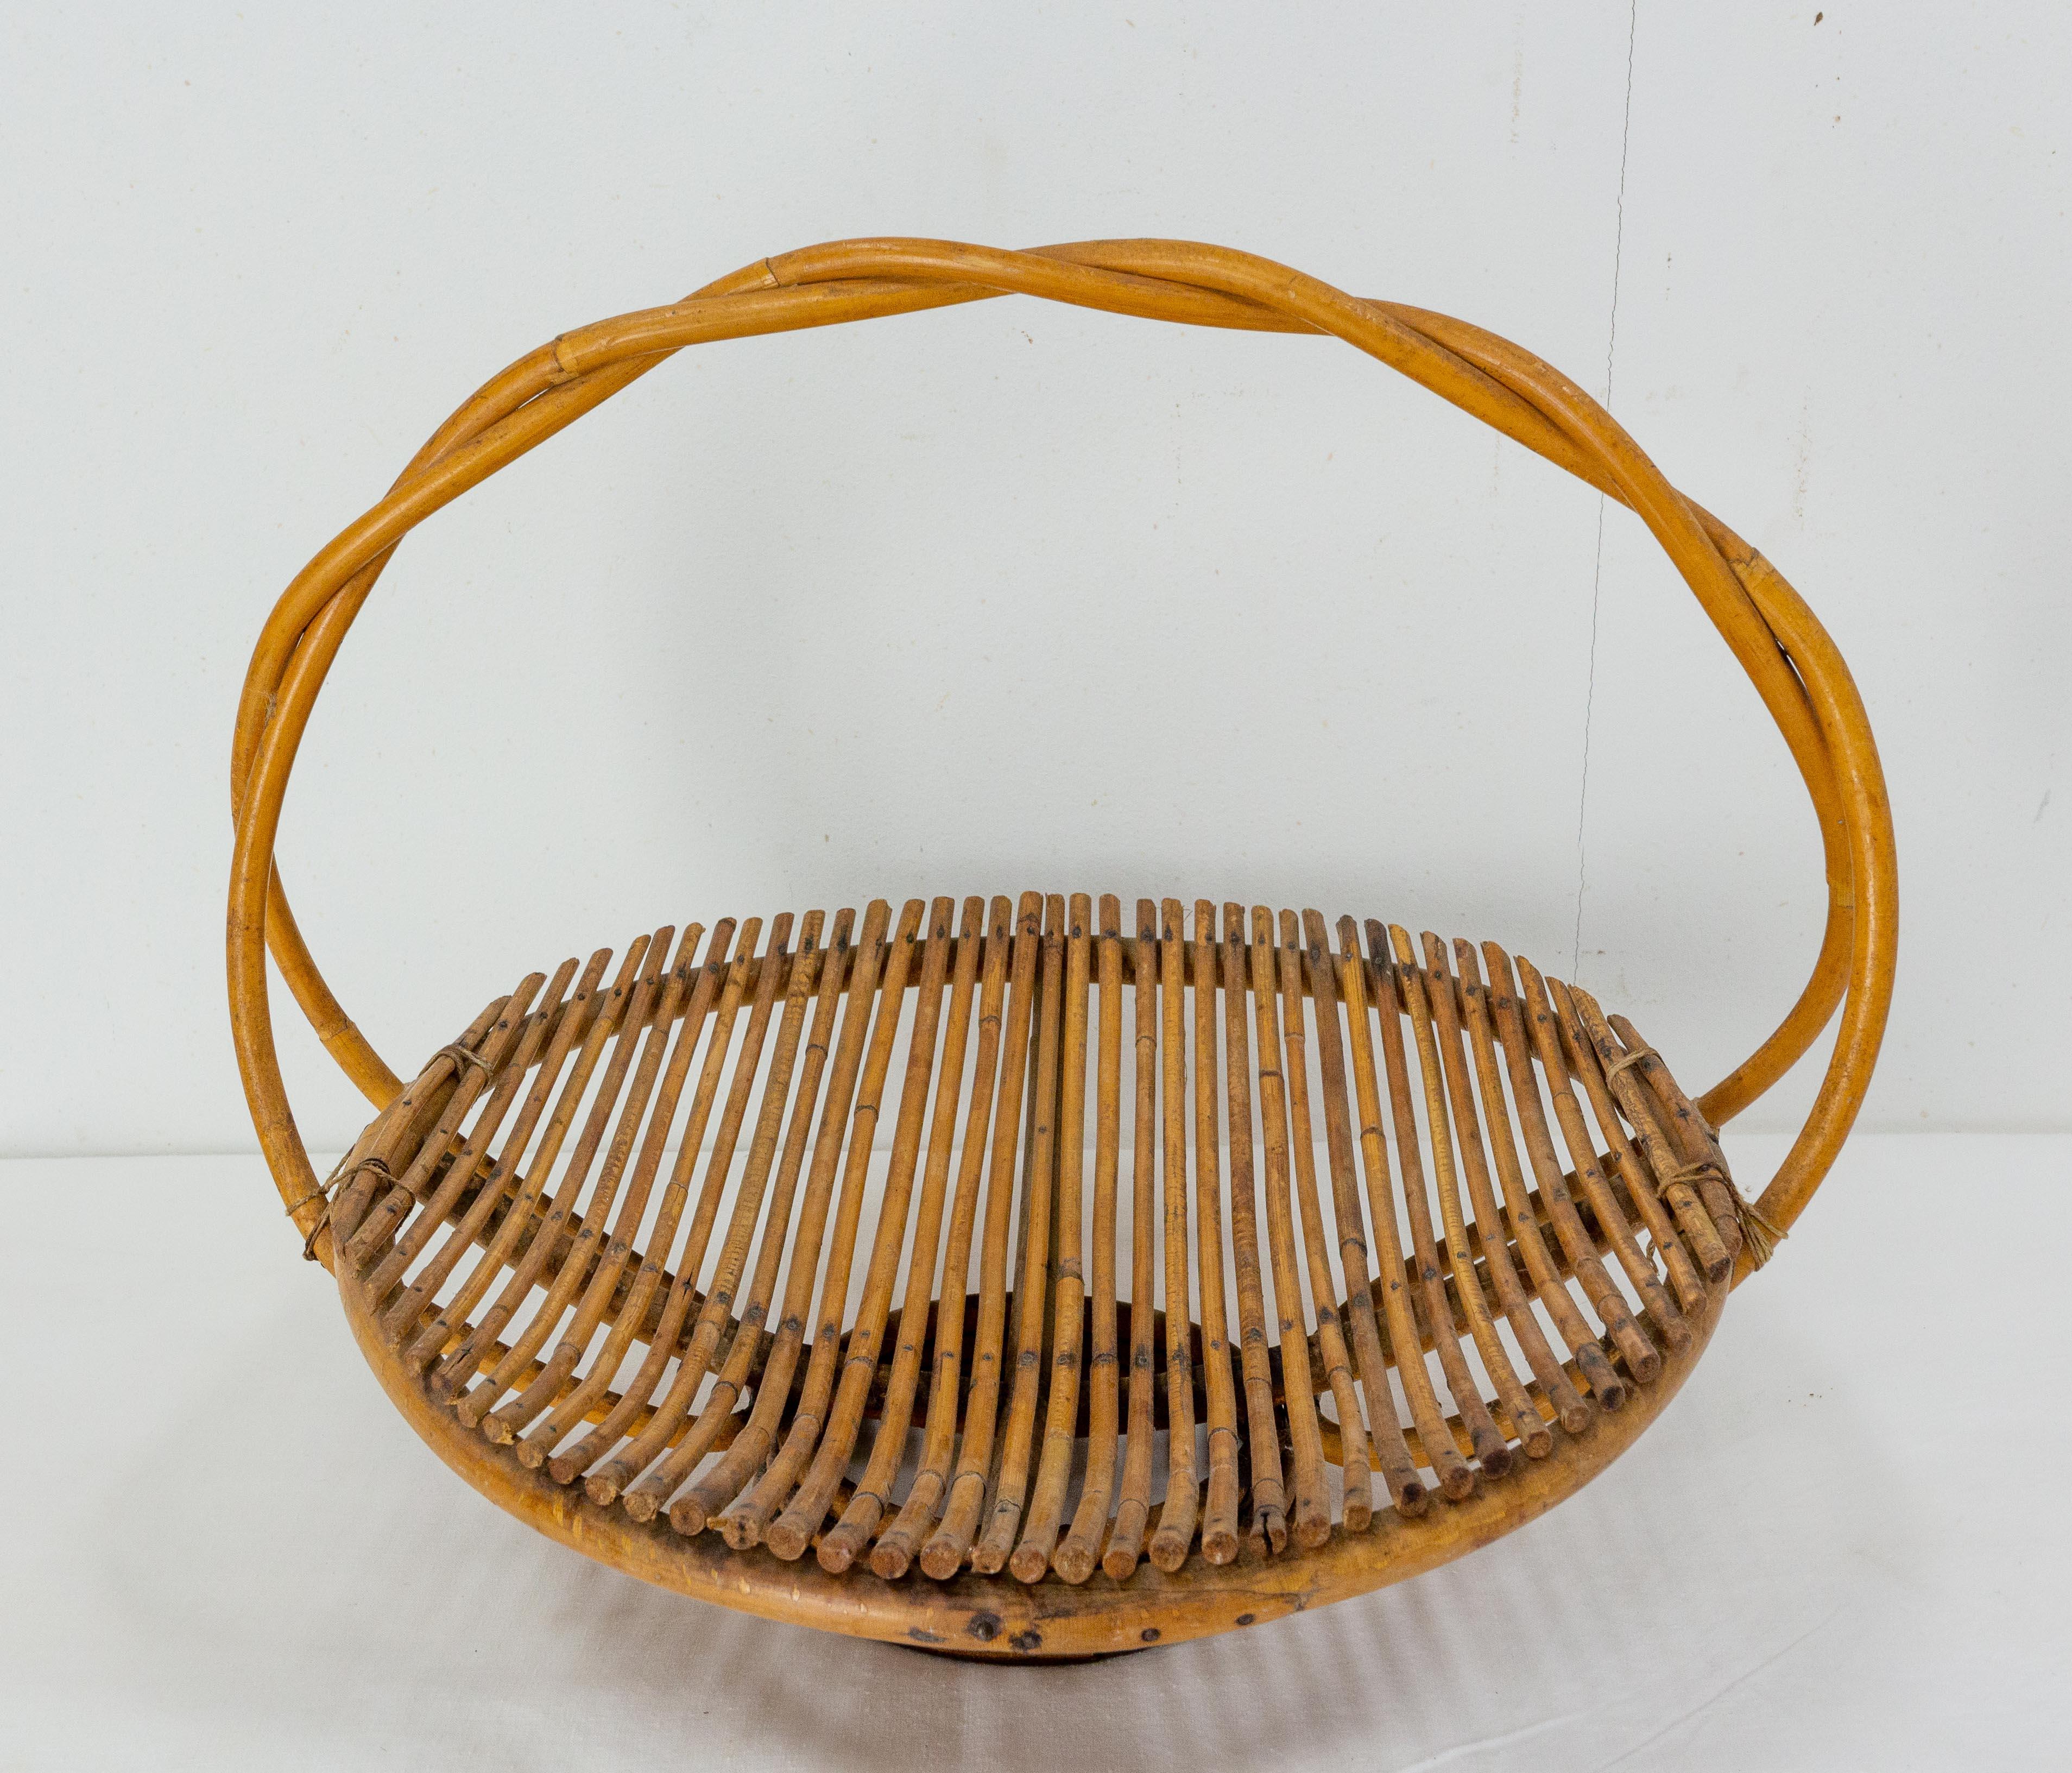 Wicker basket centerpiece form France, mid-century, circa 1950.
Fruit cup
Good condition.
 
Shipping:
L38 P33,5 H31 0,4 kg.